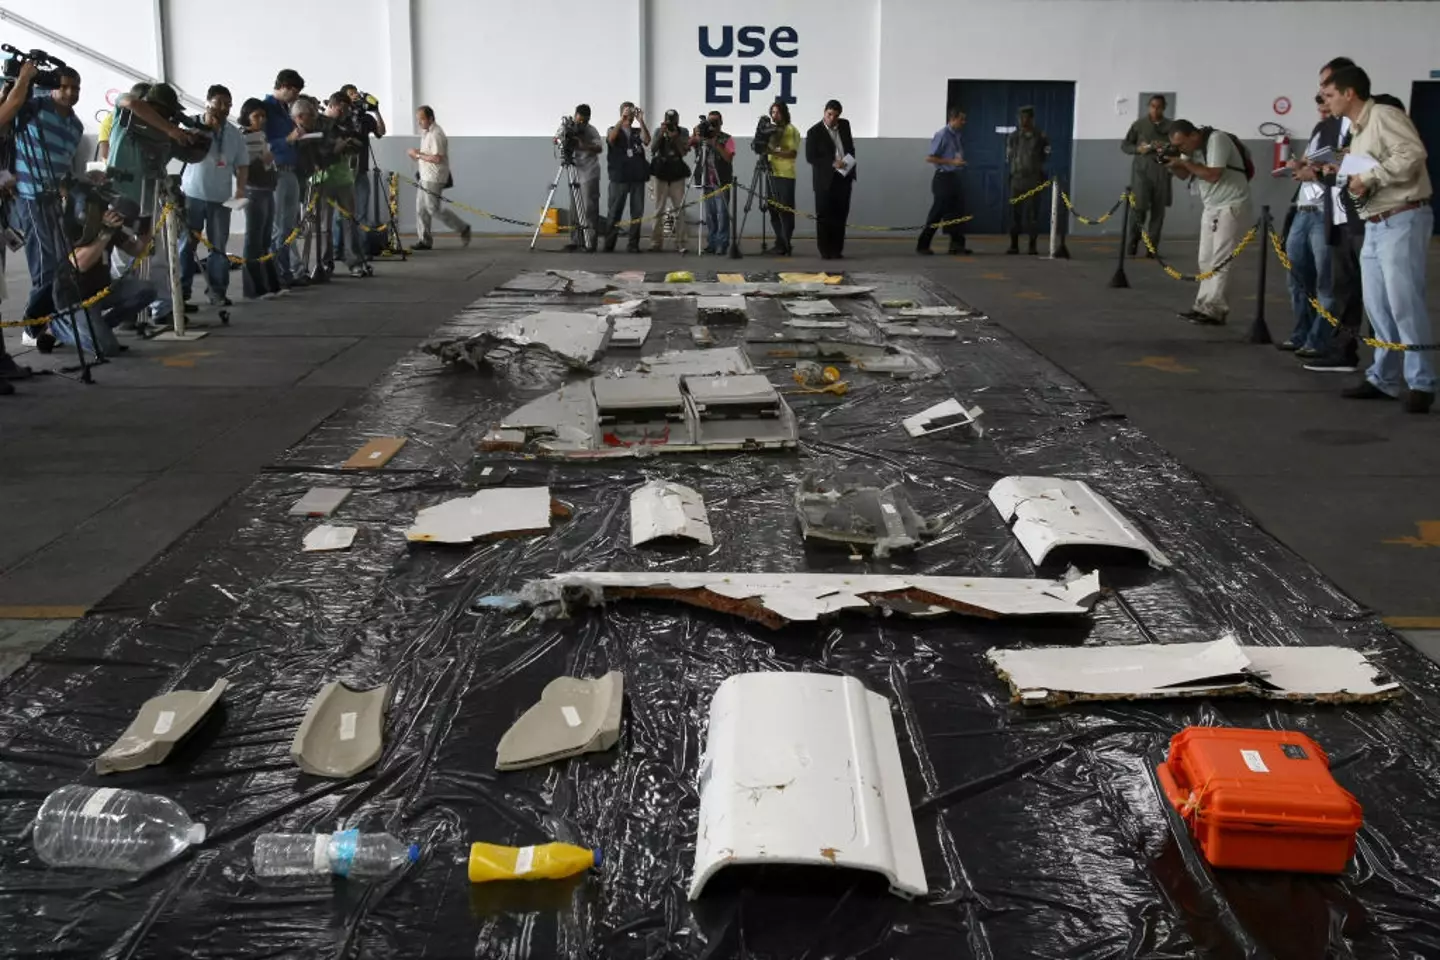 Debris was found following the incident. (MAURICIO LIMA/AFP via Getty Images)